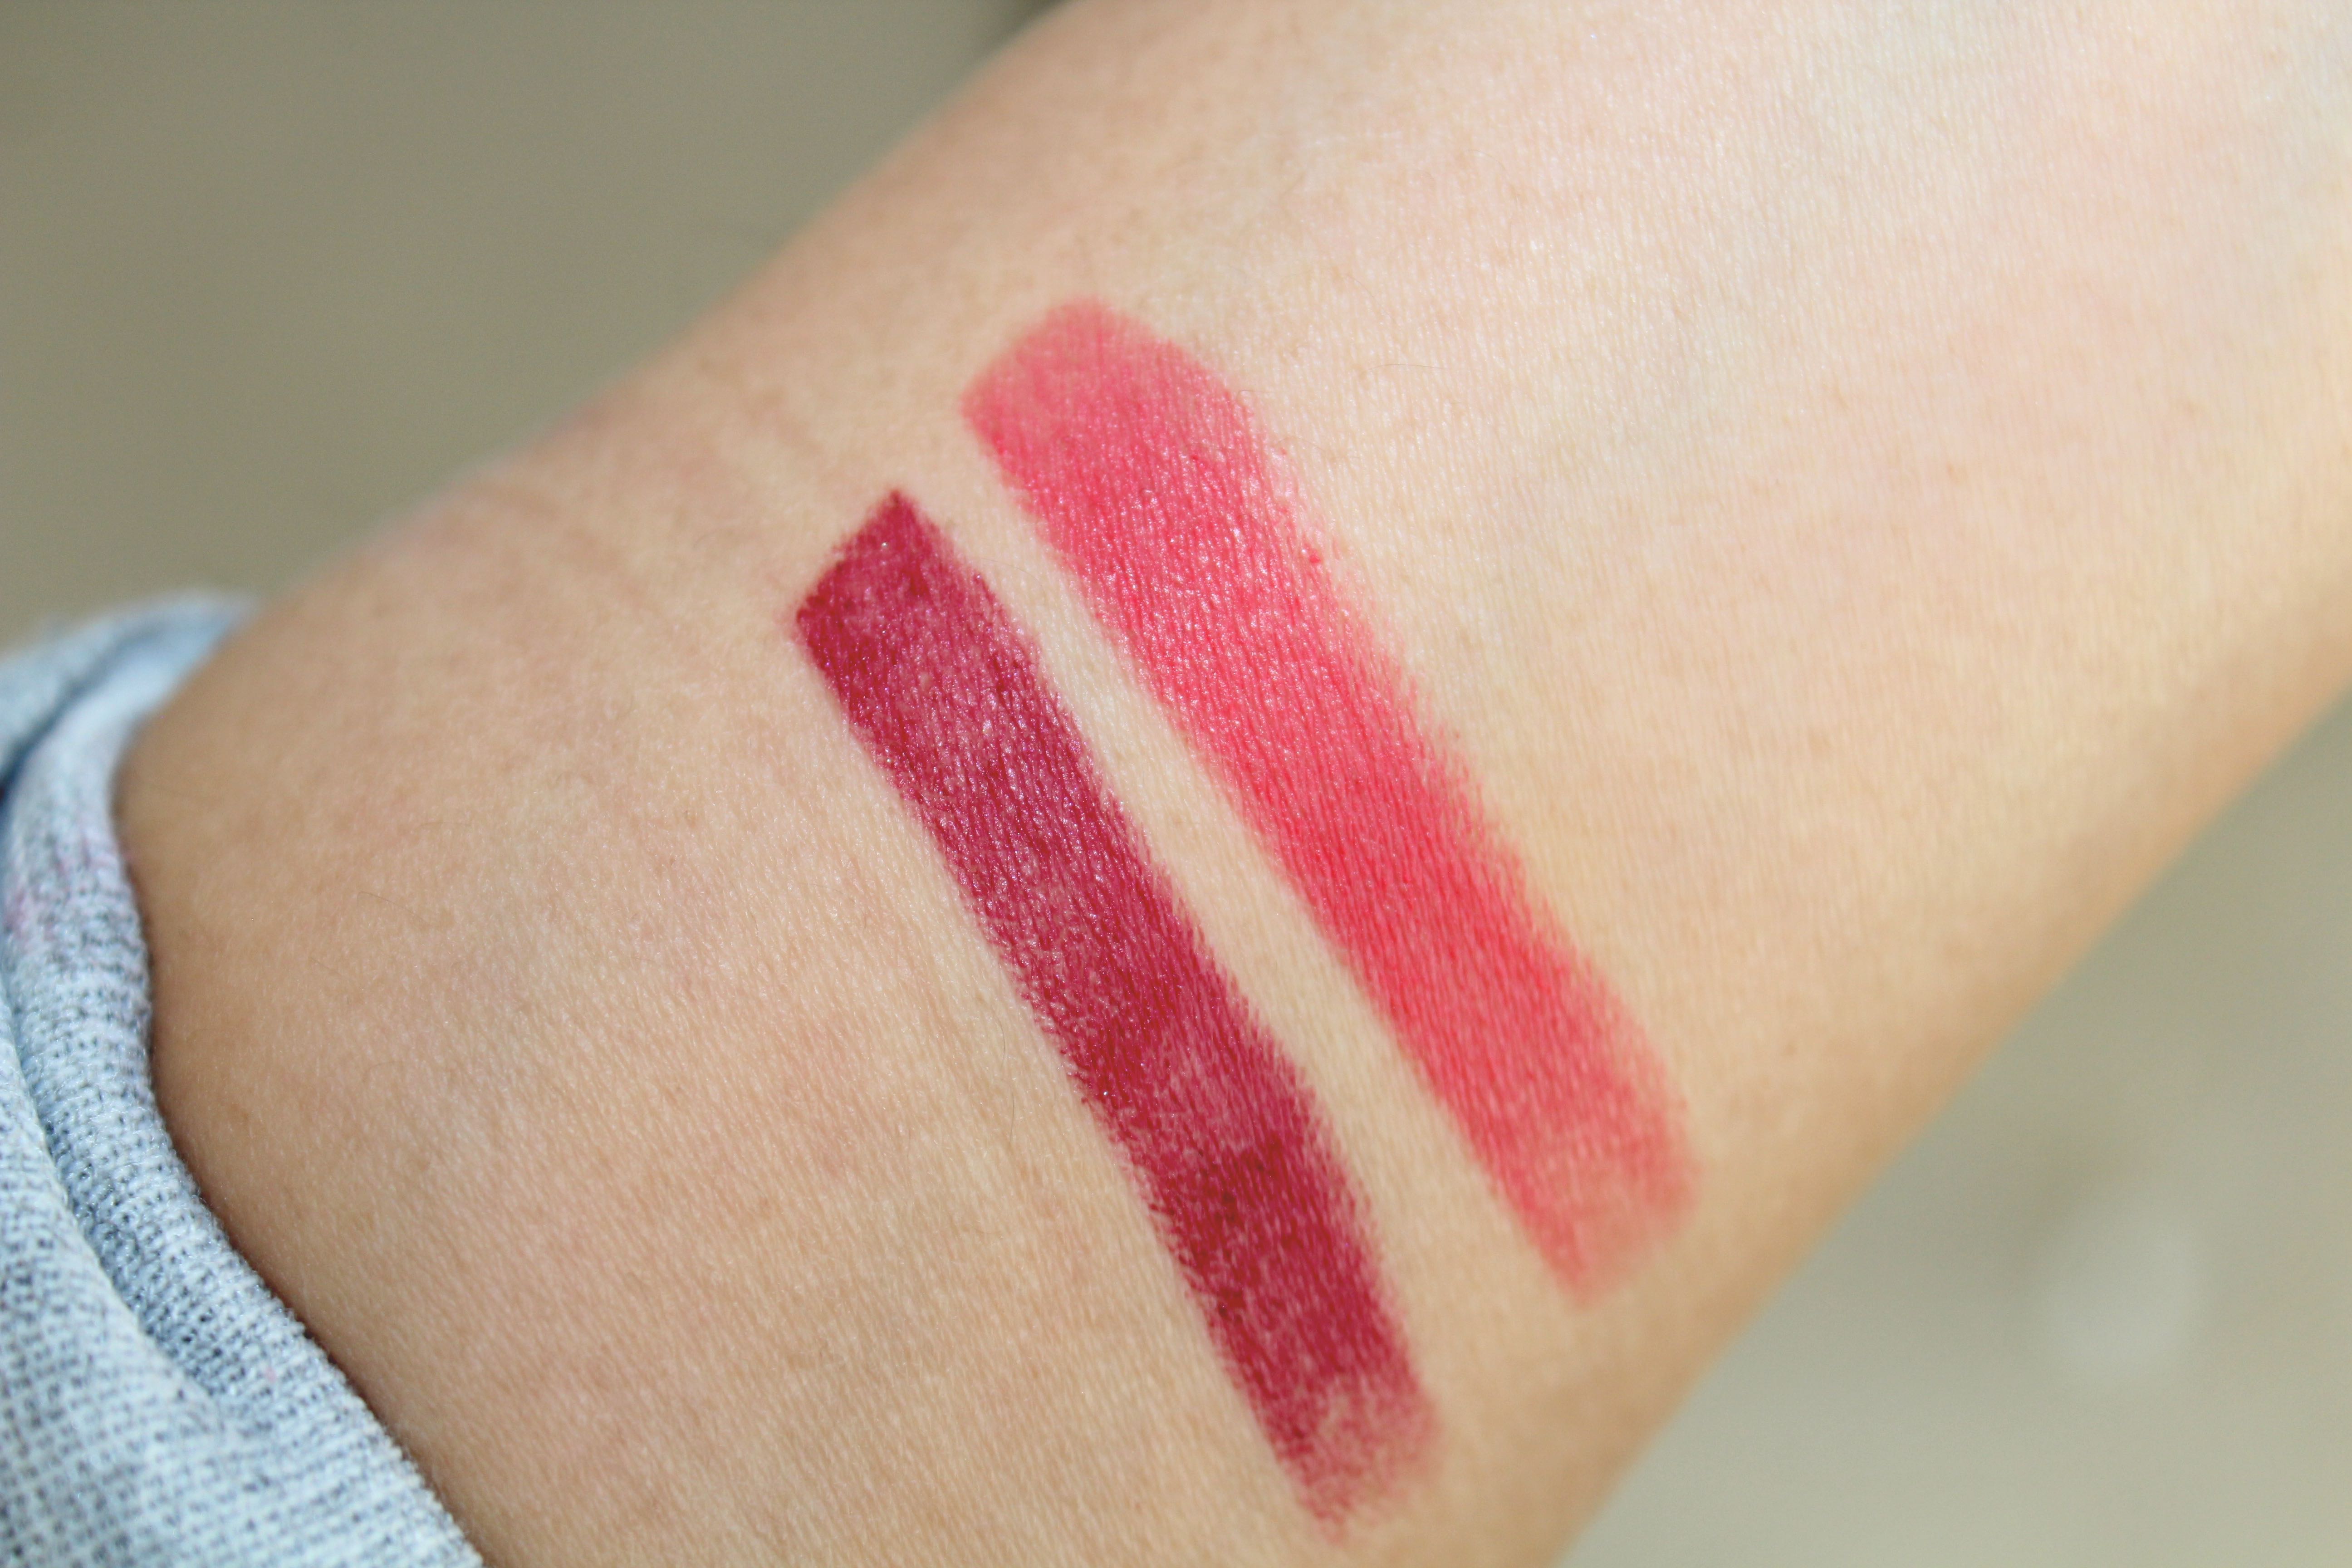 Charlotte-Tilbury-Haul-and-product-review-all-in-one-matte-reveloution-lipstick-swatches-in-lost-cherry-and-love-liberty-by-face-made-up-facemadeup